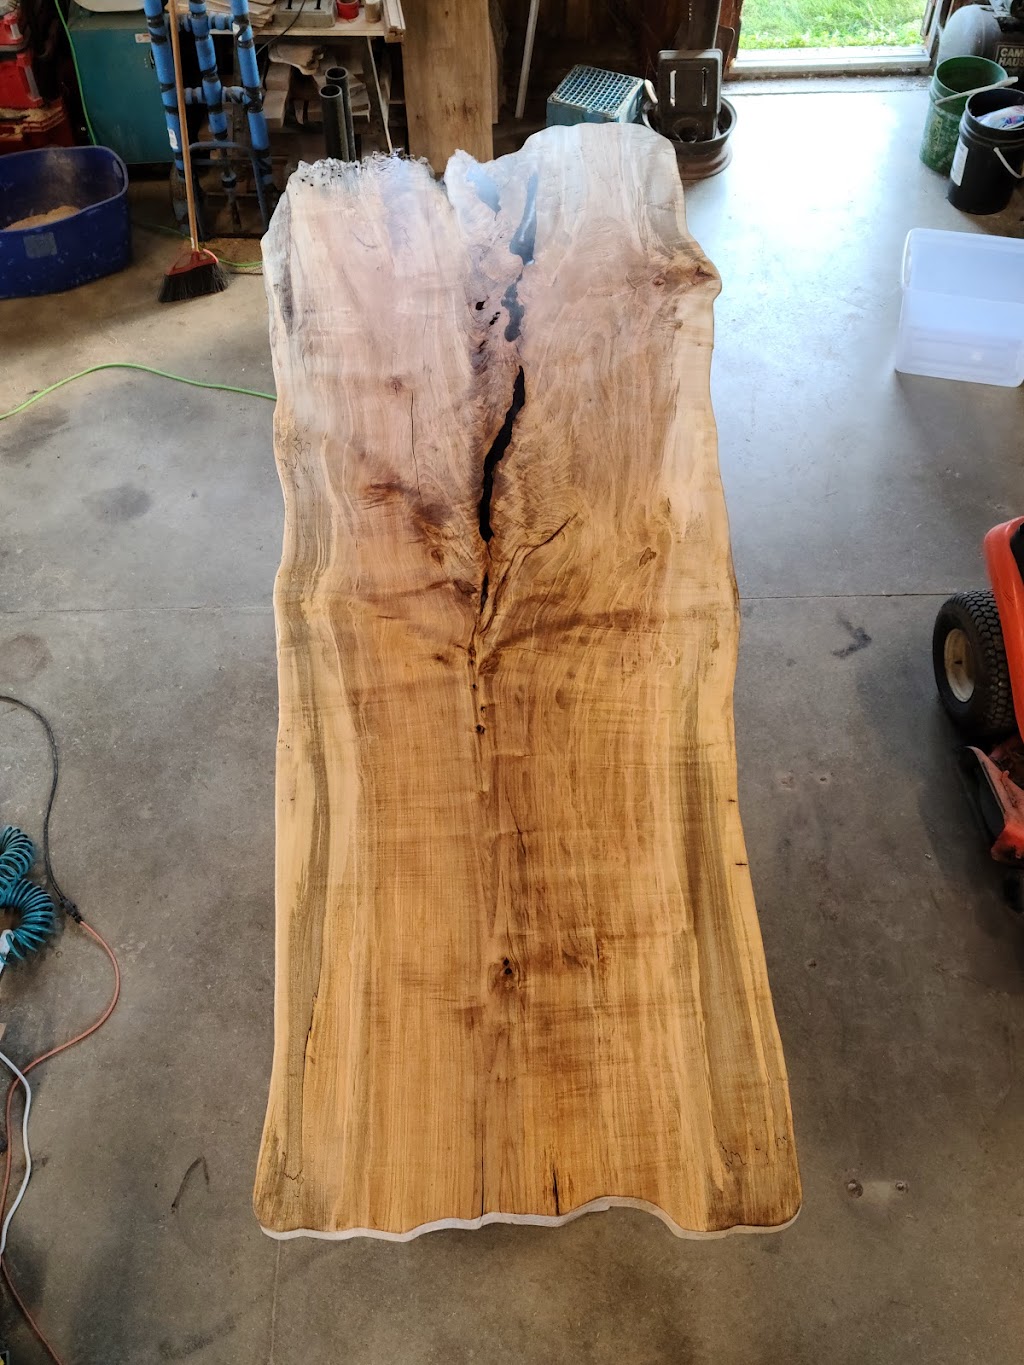 No Limits Live Edge Customs | 75554 ON-21, Bayfield, ON N0M 1G0, Canada | Phone: (226) 678-0170